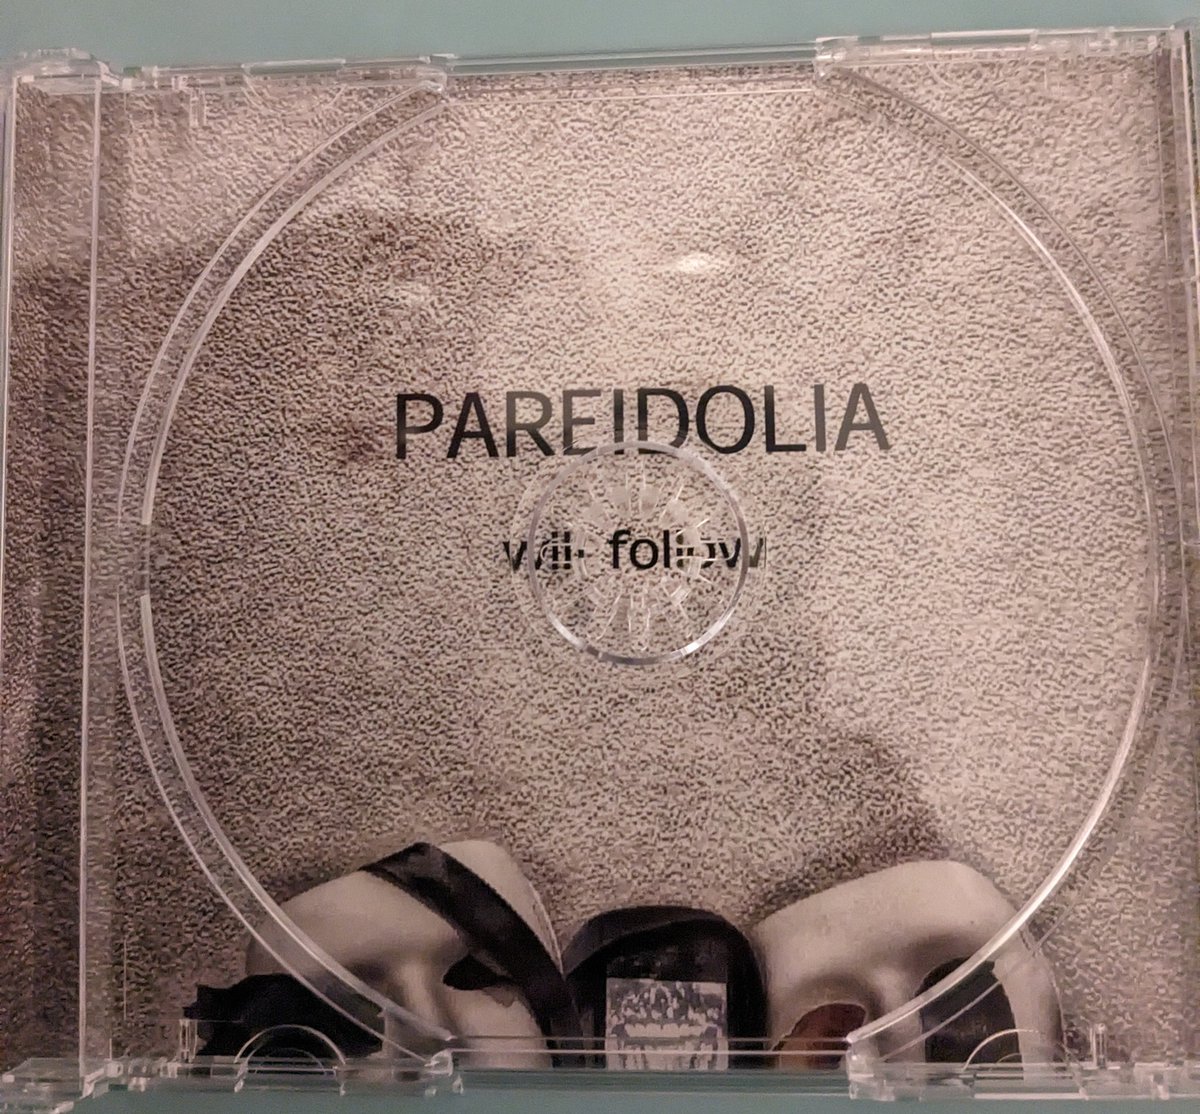 Full length album, 'Pareidolia' will be with you later this year. Until then 'CONvolUTION'